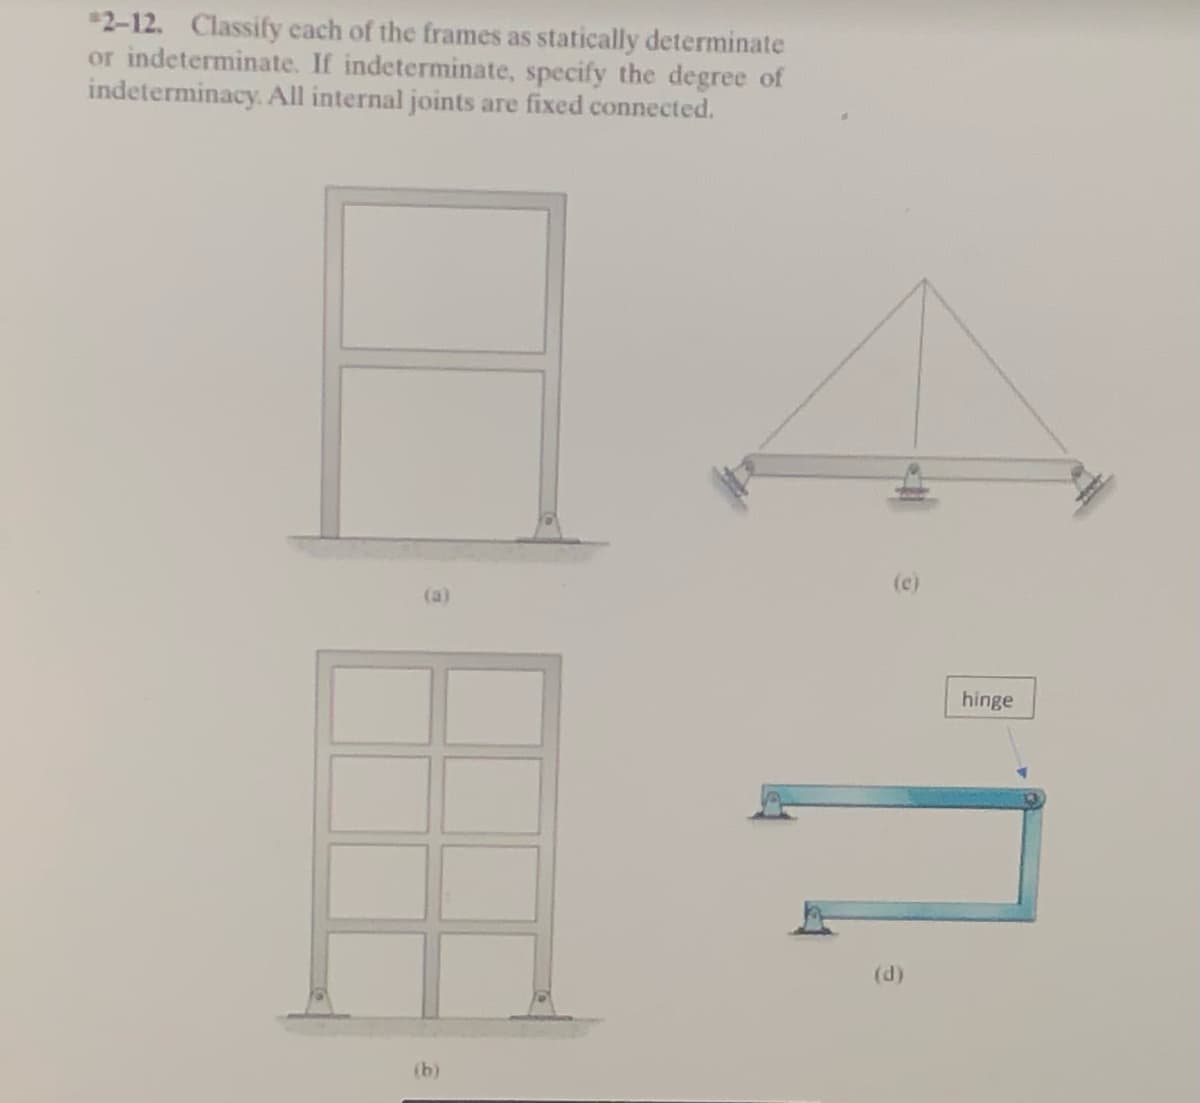 *2-12. Classify each of the frames as statically determinate
or indeterminate. If indeterminate, specify the degree of
indeterminacy. All internal joints are fixed connected.
(c)
(a)
hinge
(d)
(b)
